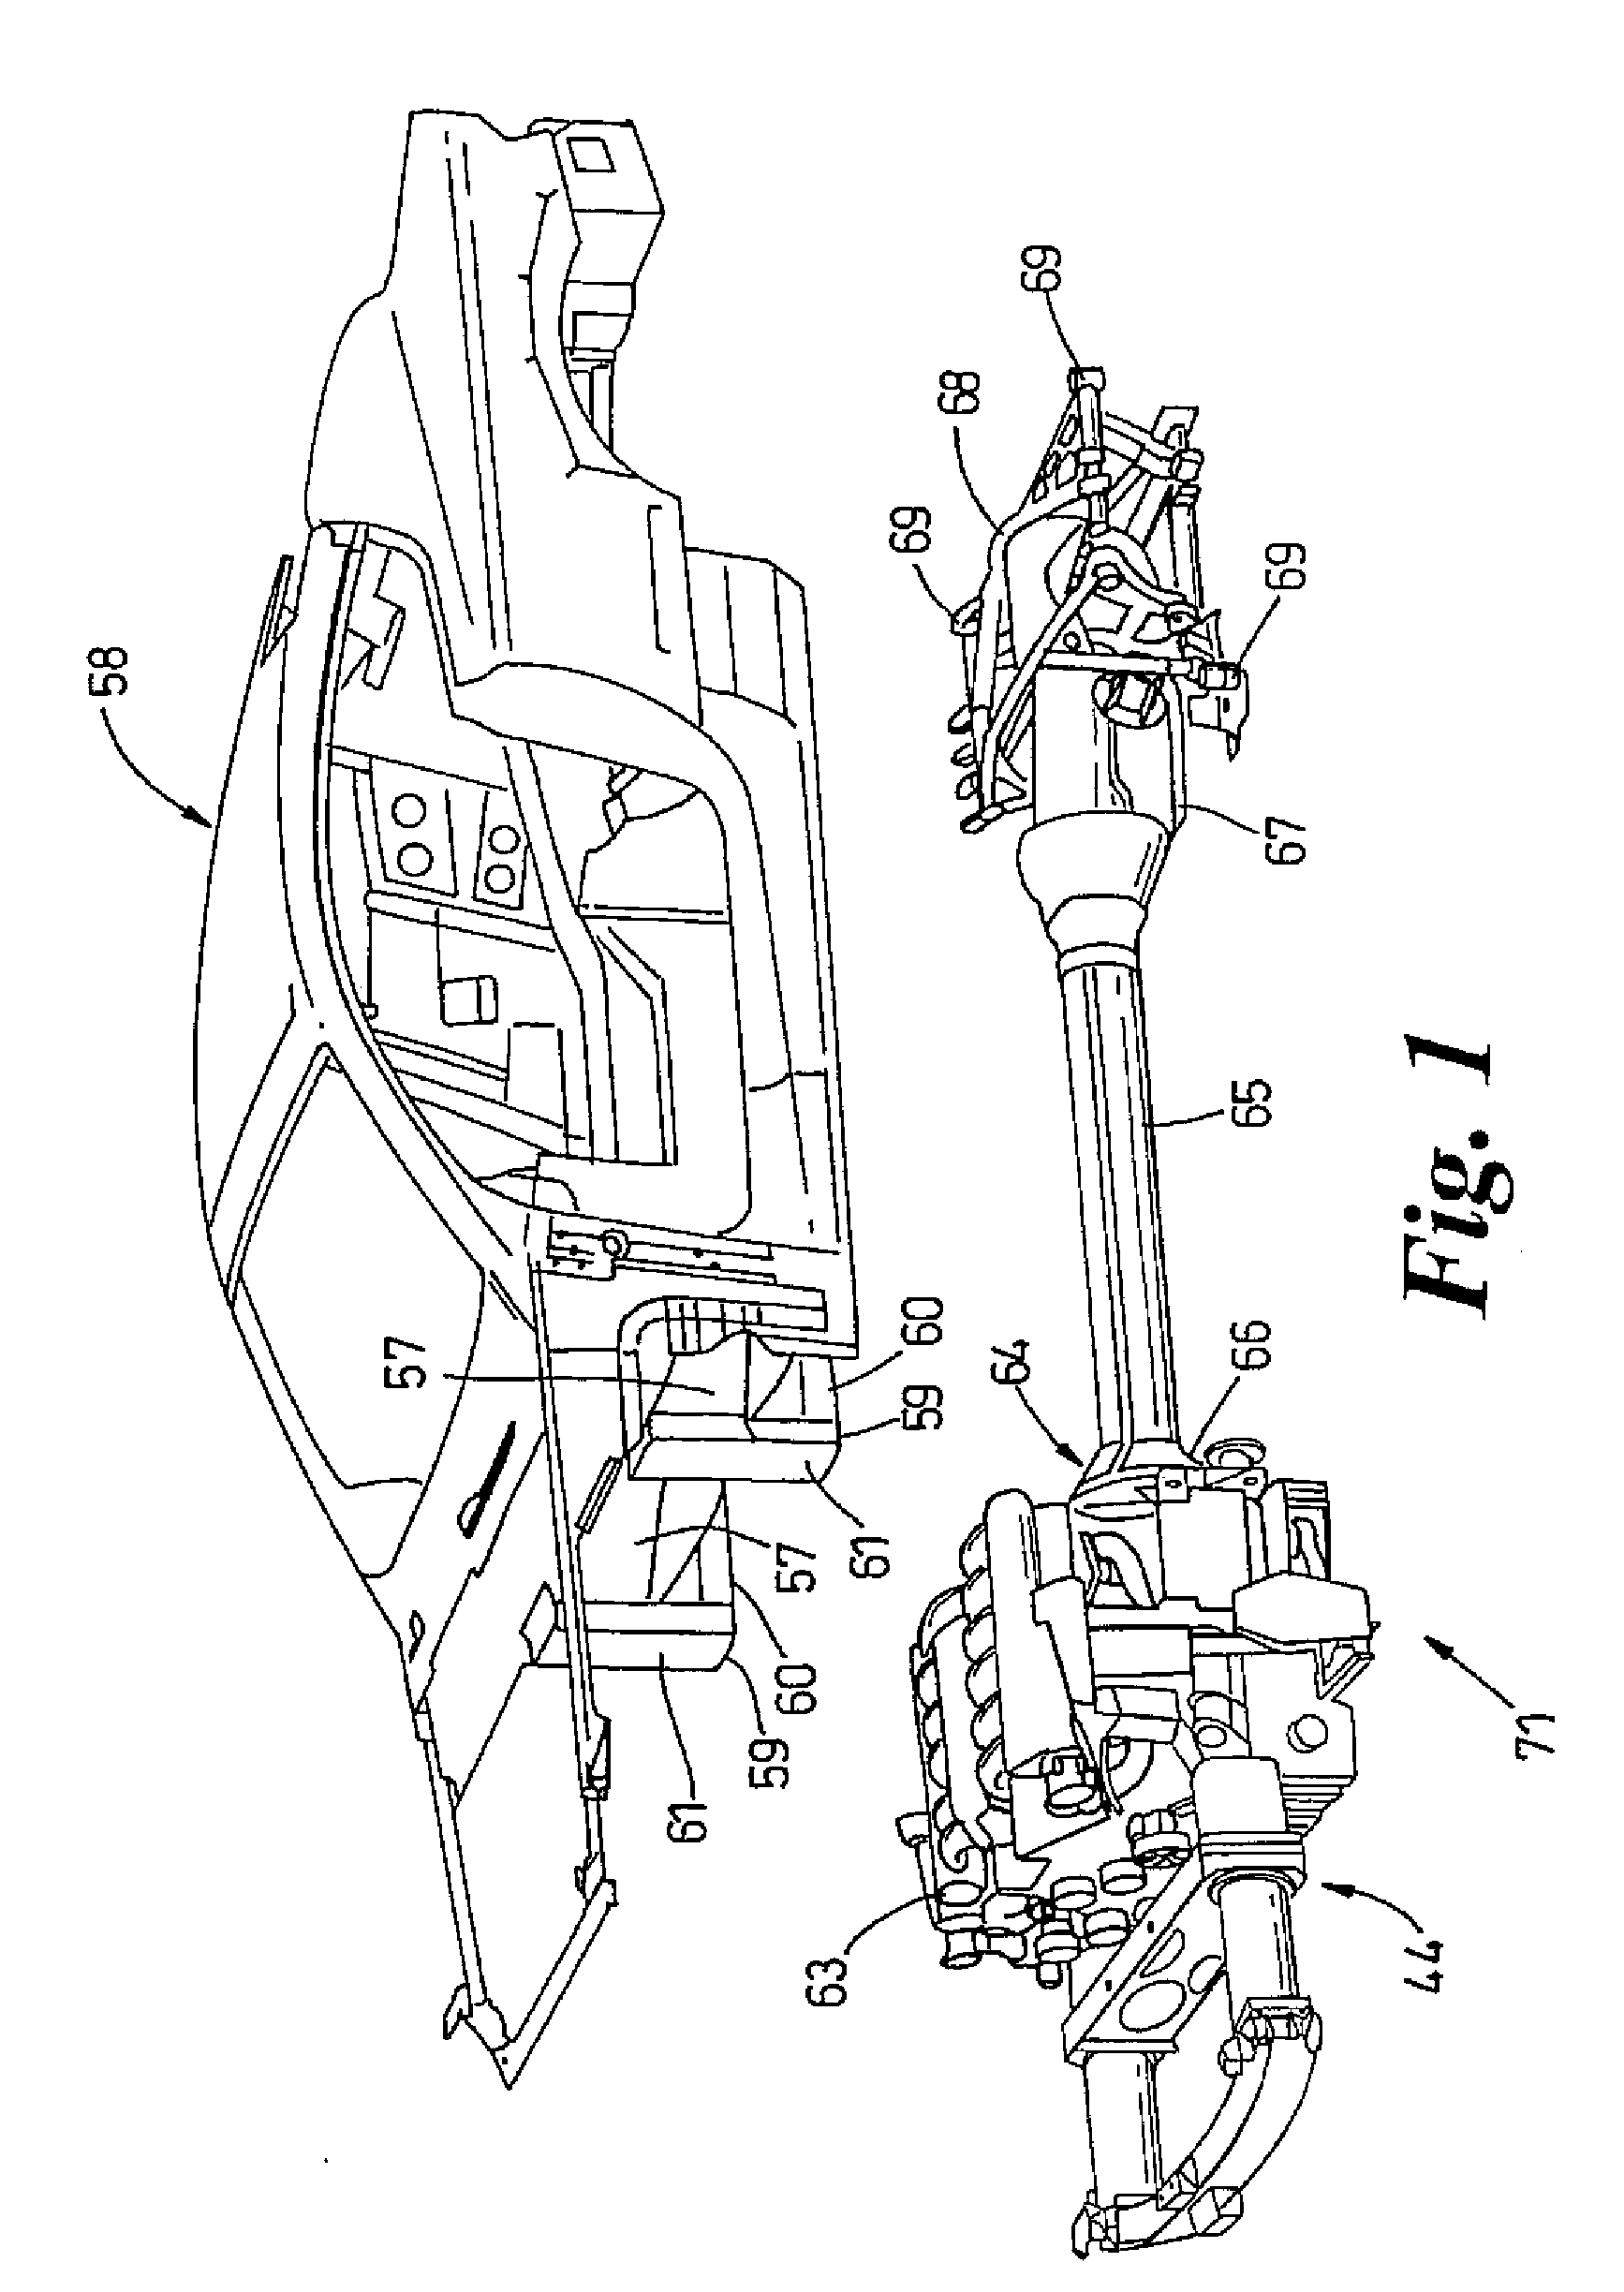 Assembly of a motor vehicle body and a power train and chassis module